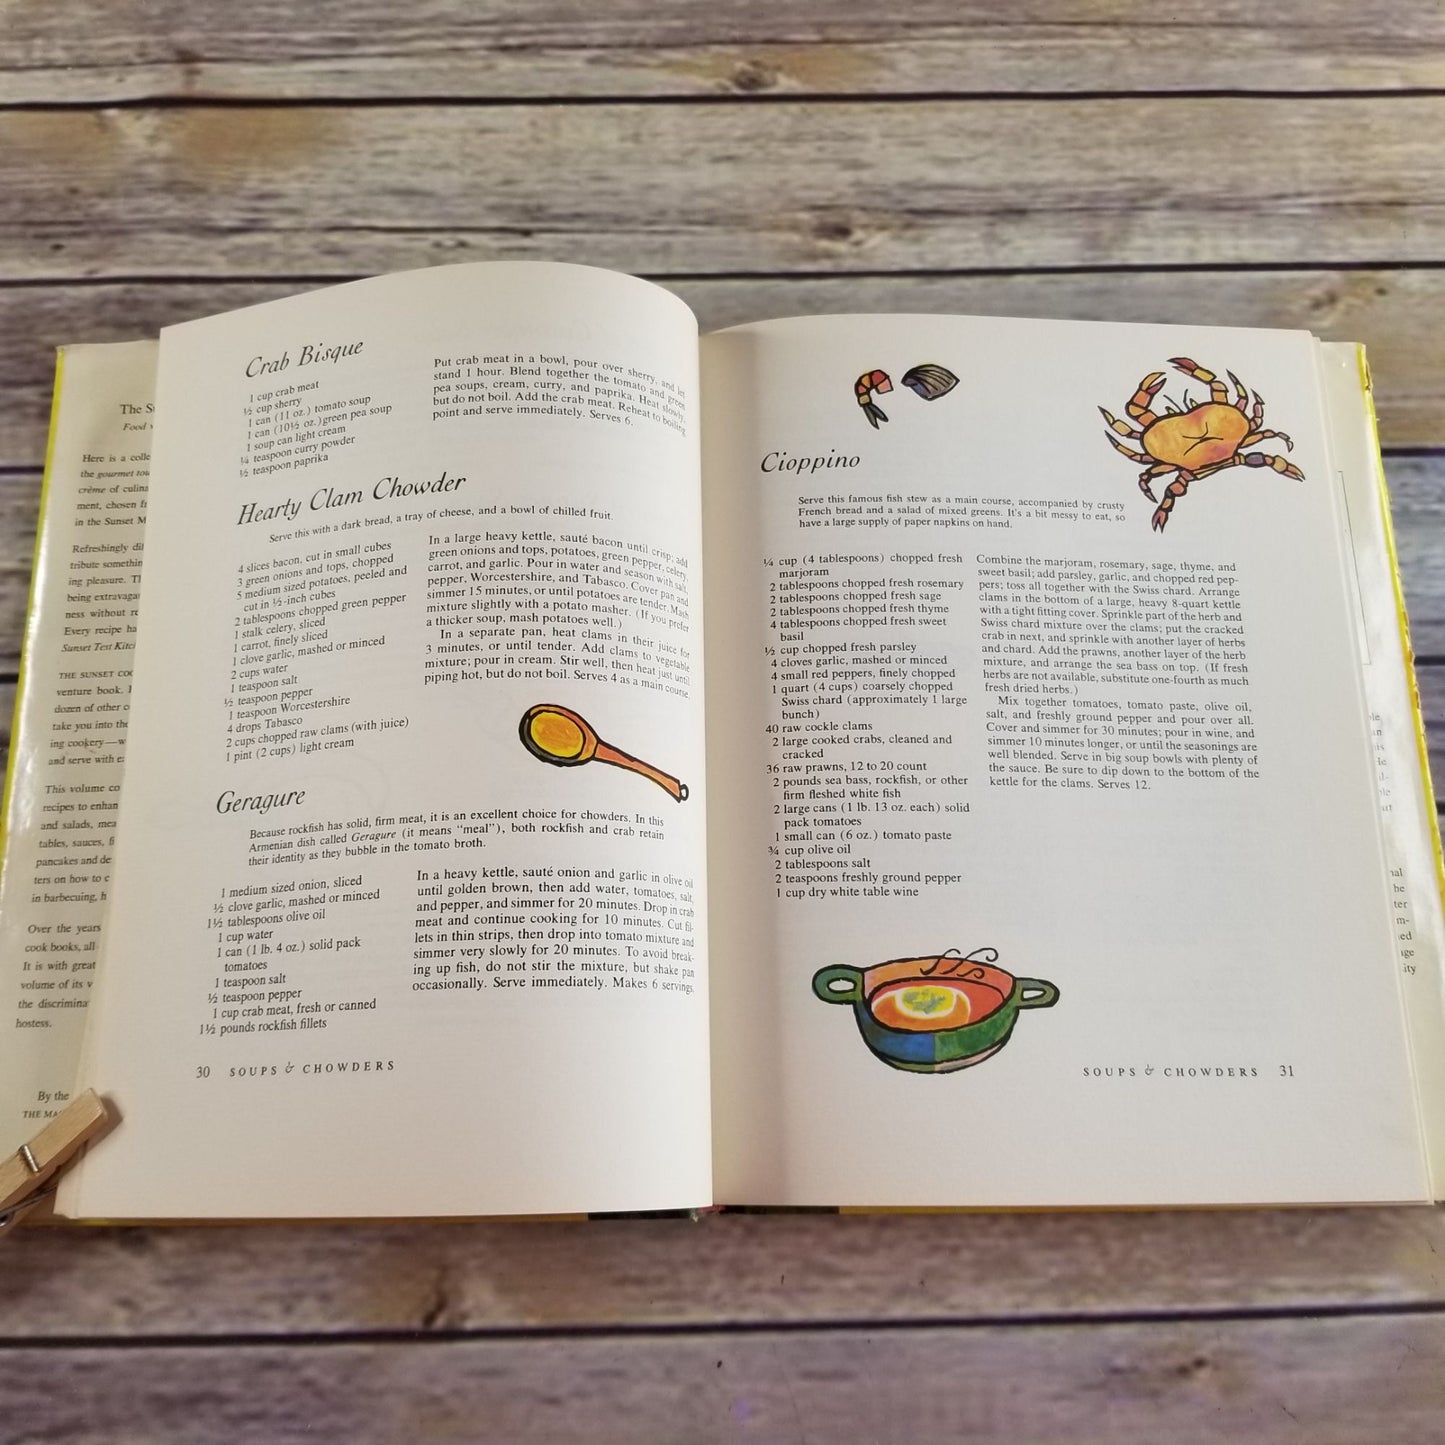 Vintage Cookbook The Sunset Cook Book 1960 First Printing Hardcover Recipes Game, Barbecue, Pastes, Pancakes, Picnics, and More